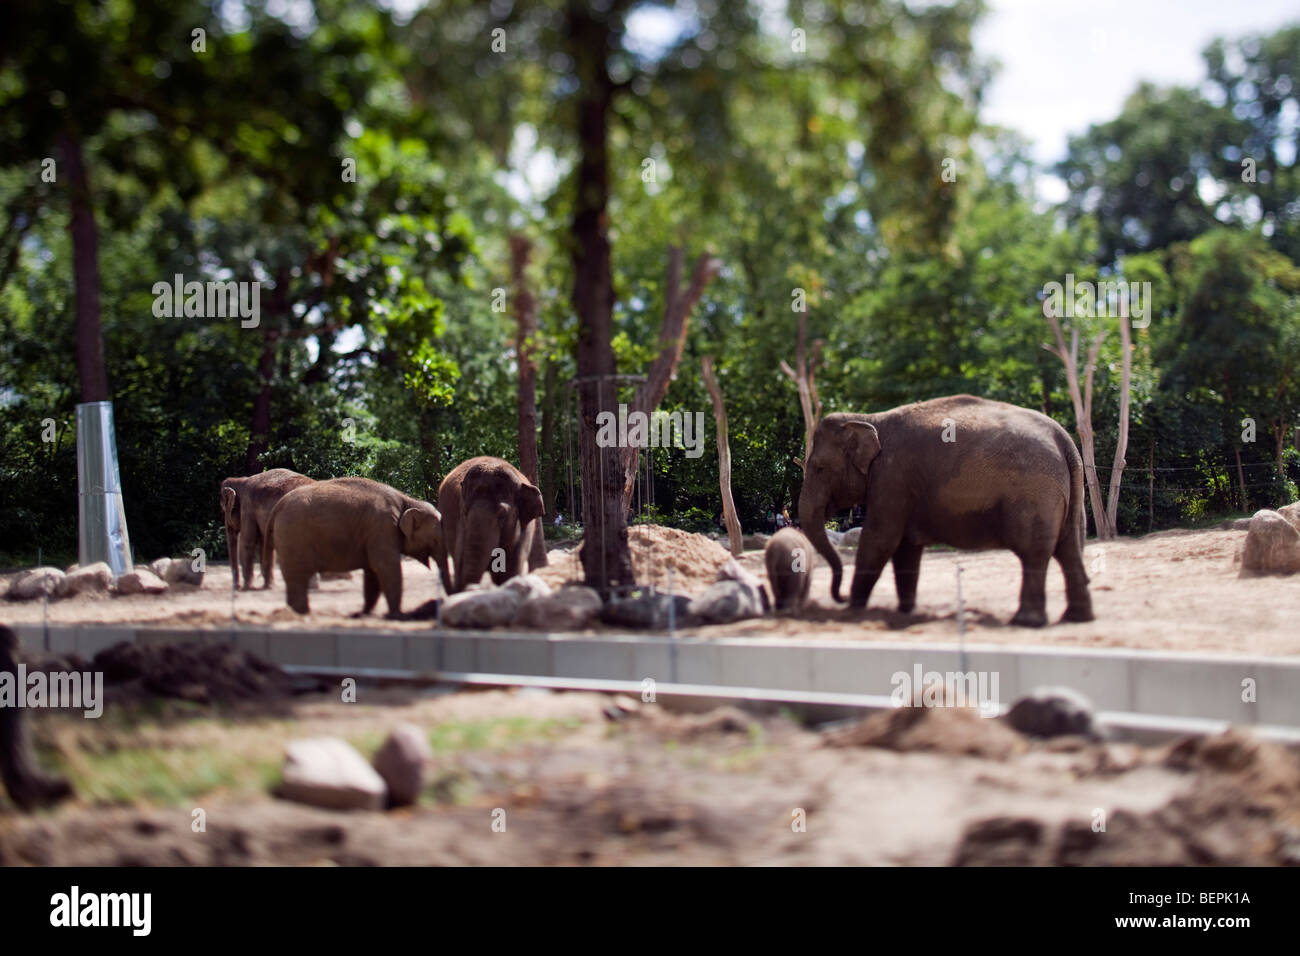 Asian elephants on Berlin zoo, Germany. Tilted lens used for shallow depth of field. Stock Photo